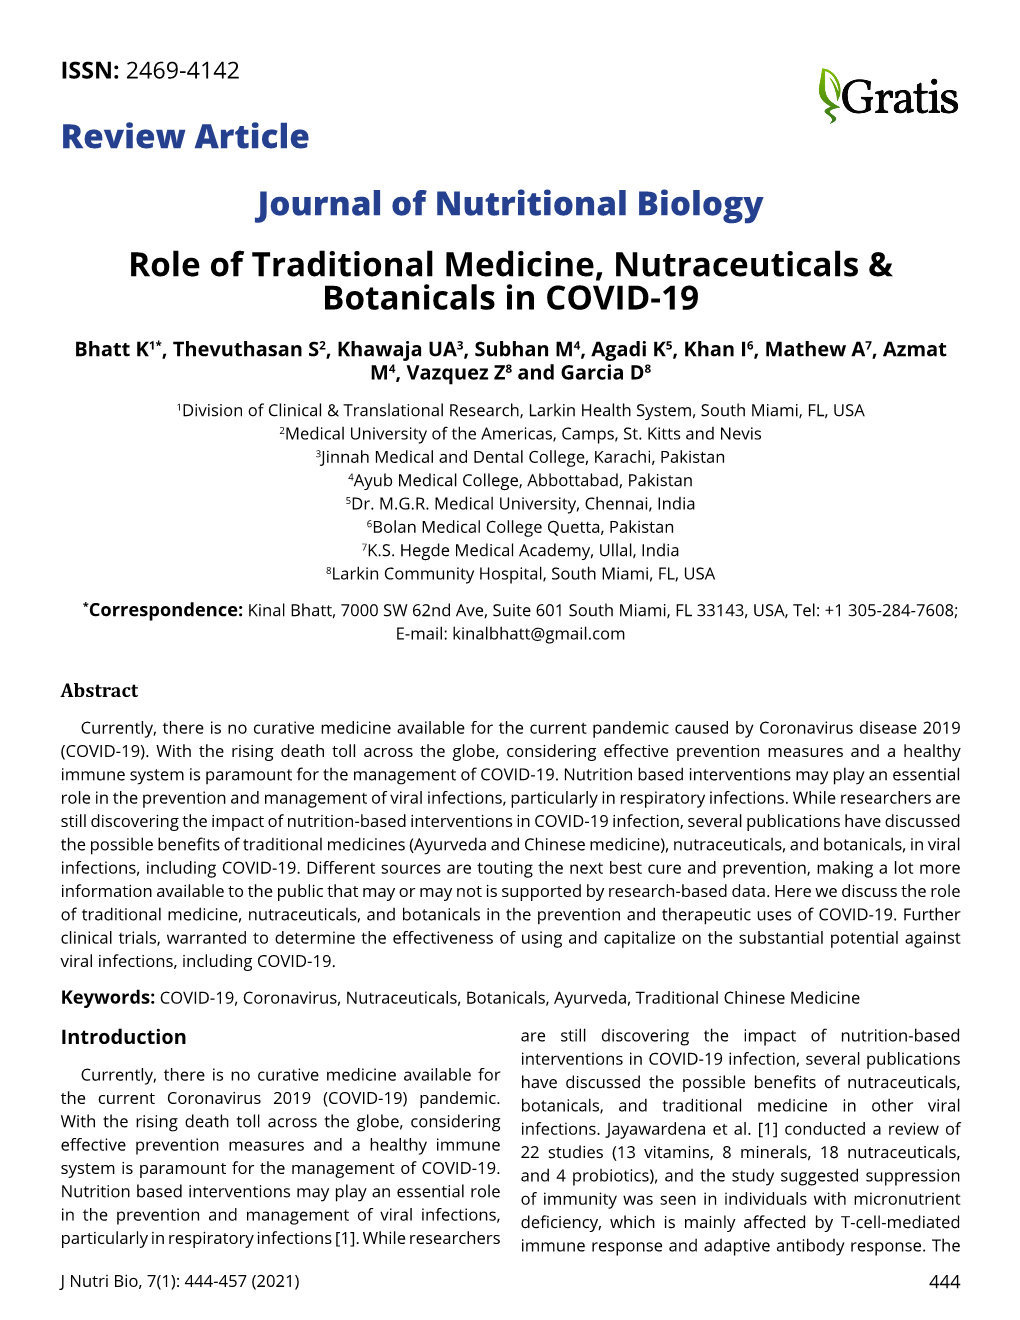 Journal of Nutritional Biology Role of Traditional Medicine, Nutraceuticals & Botanicals in COVID-19